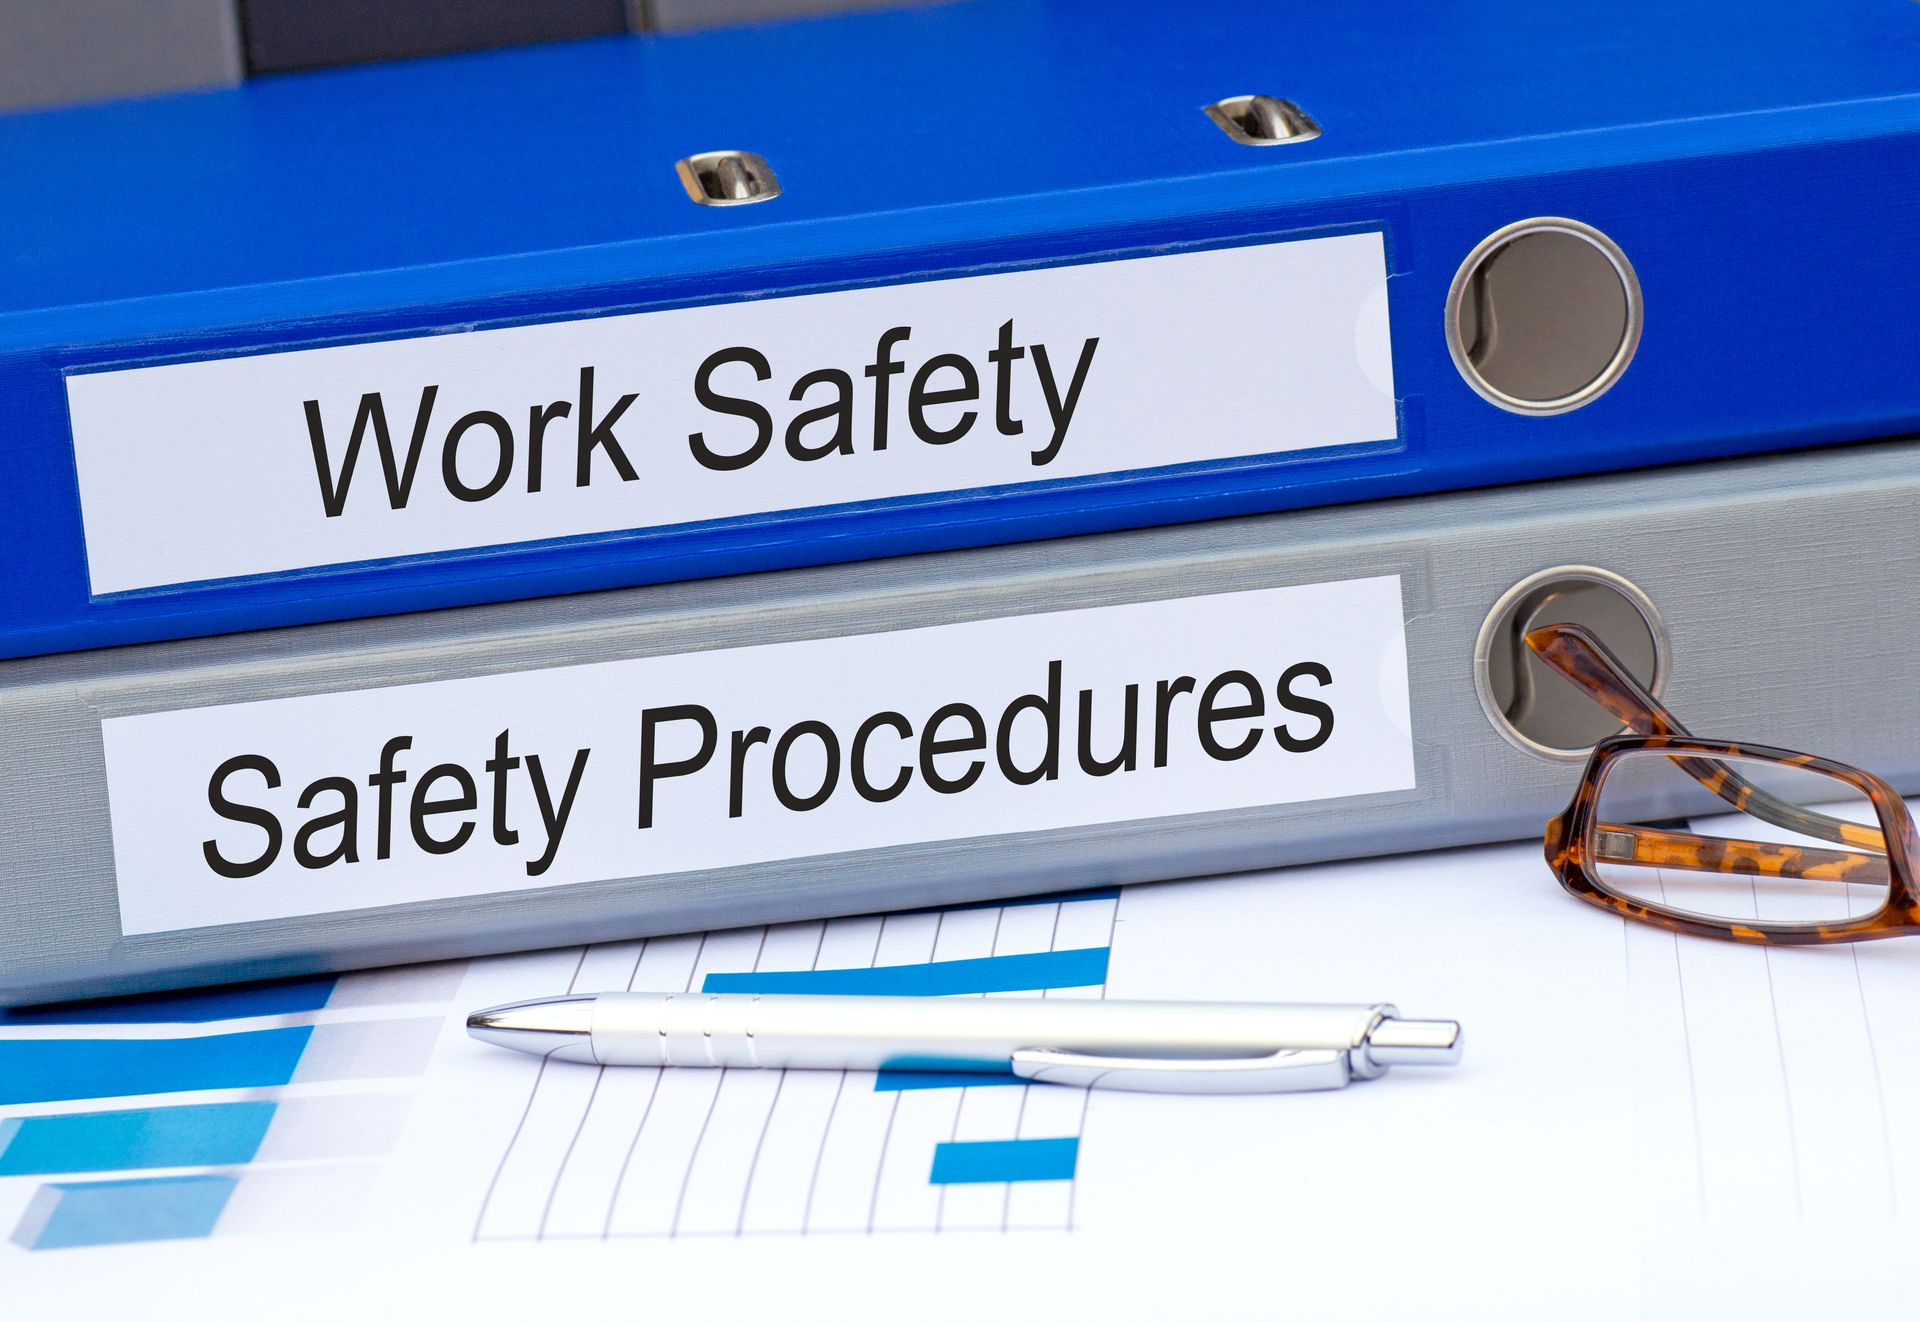 a written plan designed to minimize accidents on a worksite